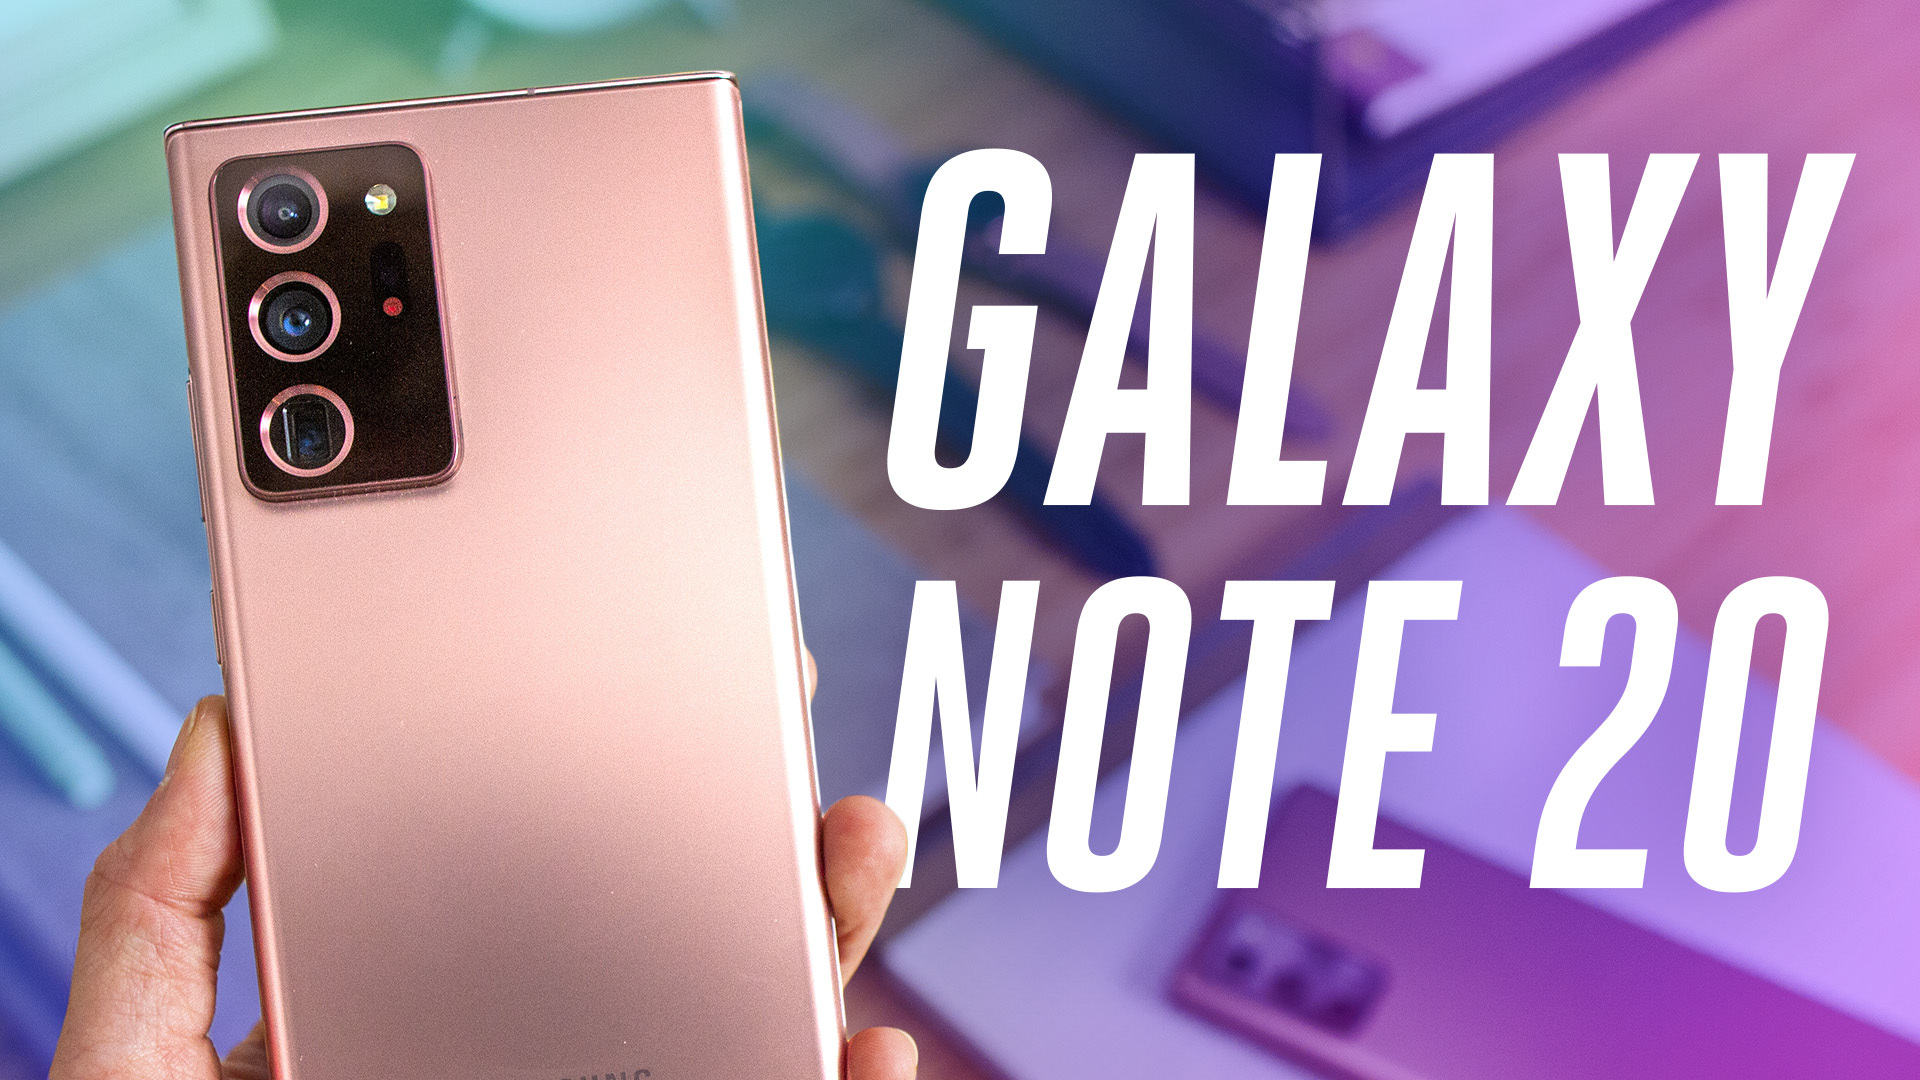 Samsung Galaxy Note20 Ultra leaks in all its glory with full specs